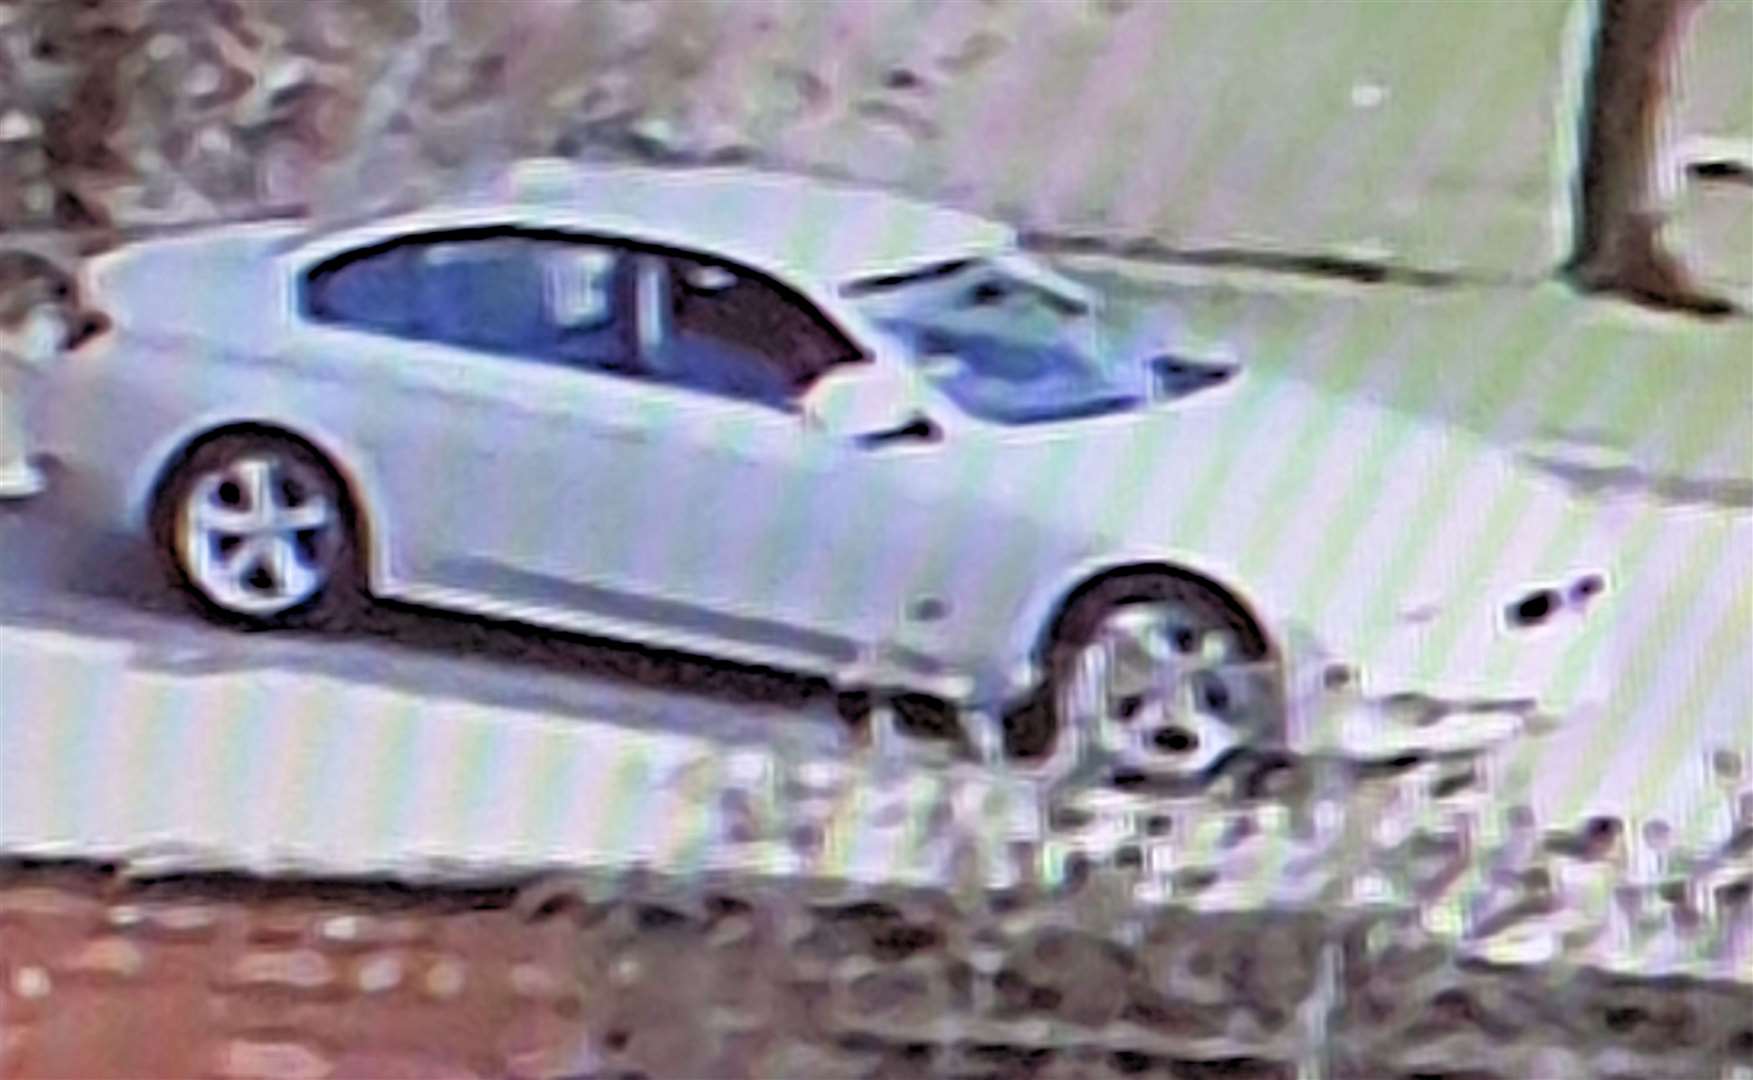 Police are looking to identify the driver of this vehicle spotted in Cedar Close, Ashford last Tuesday